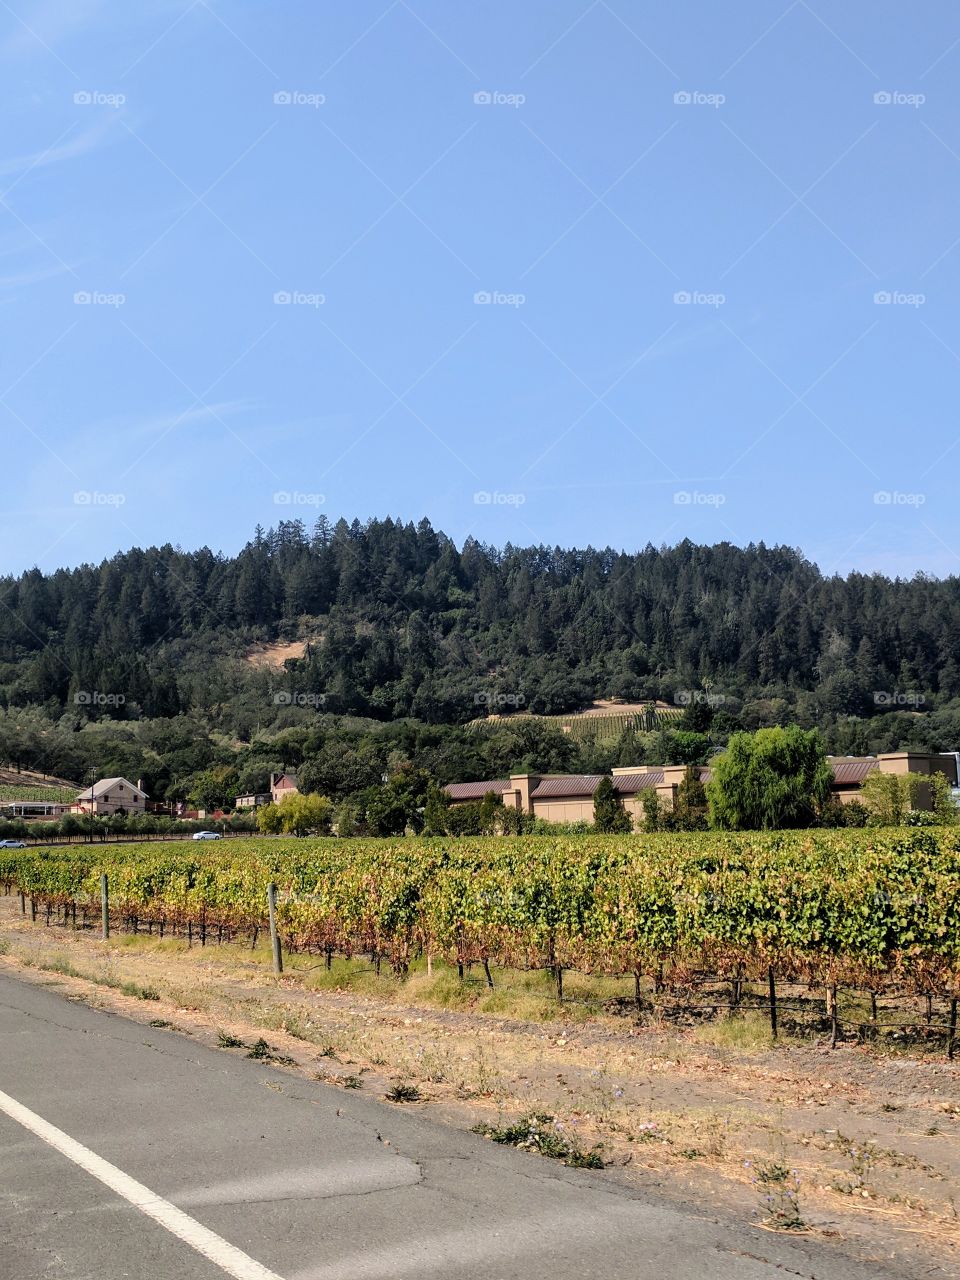 Driving through wine country